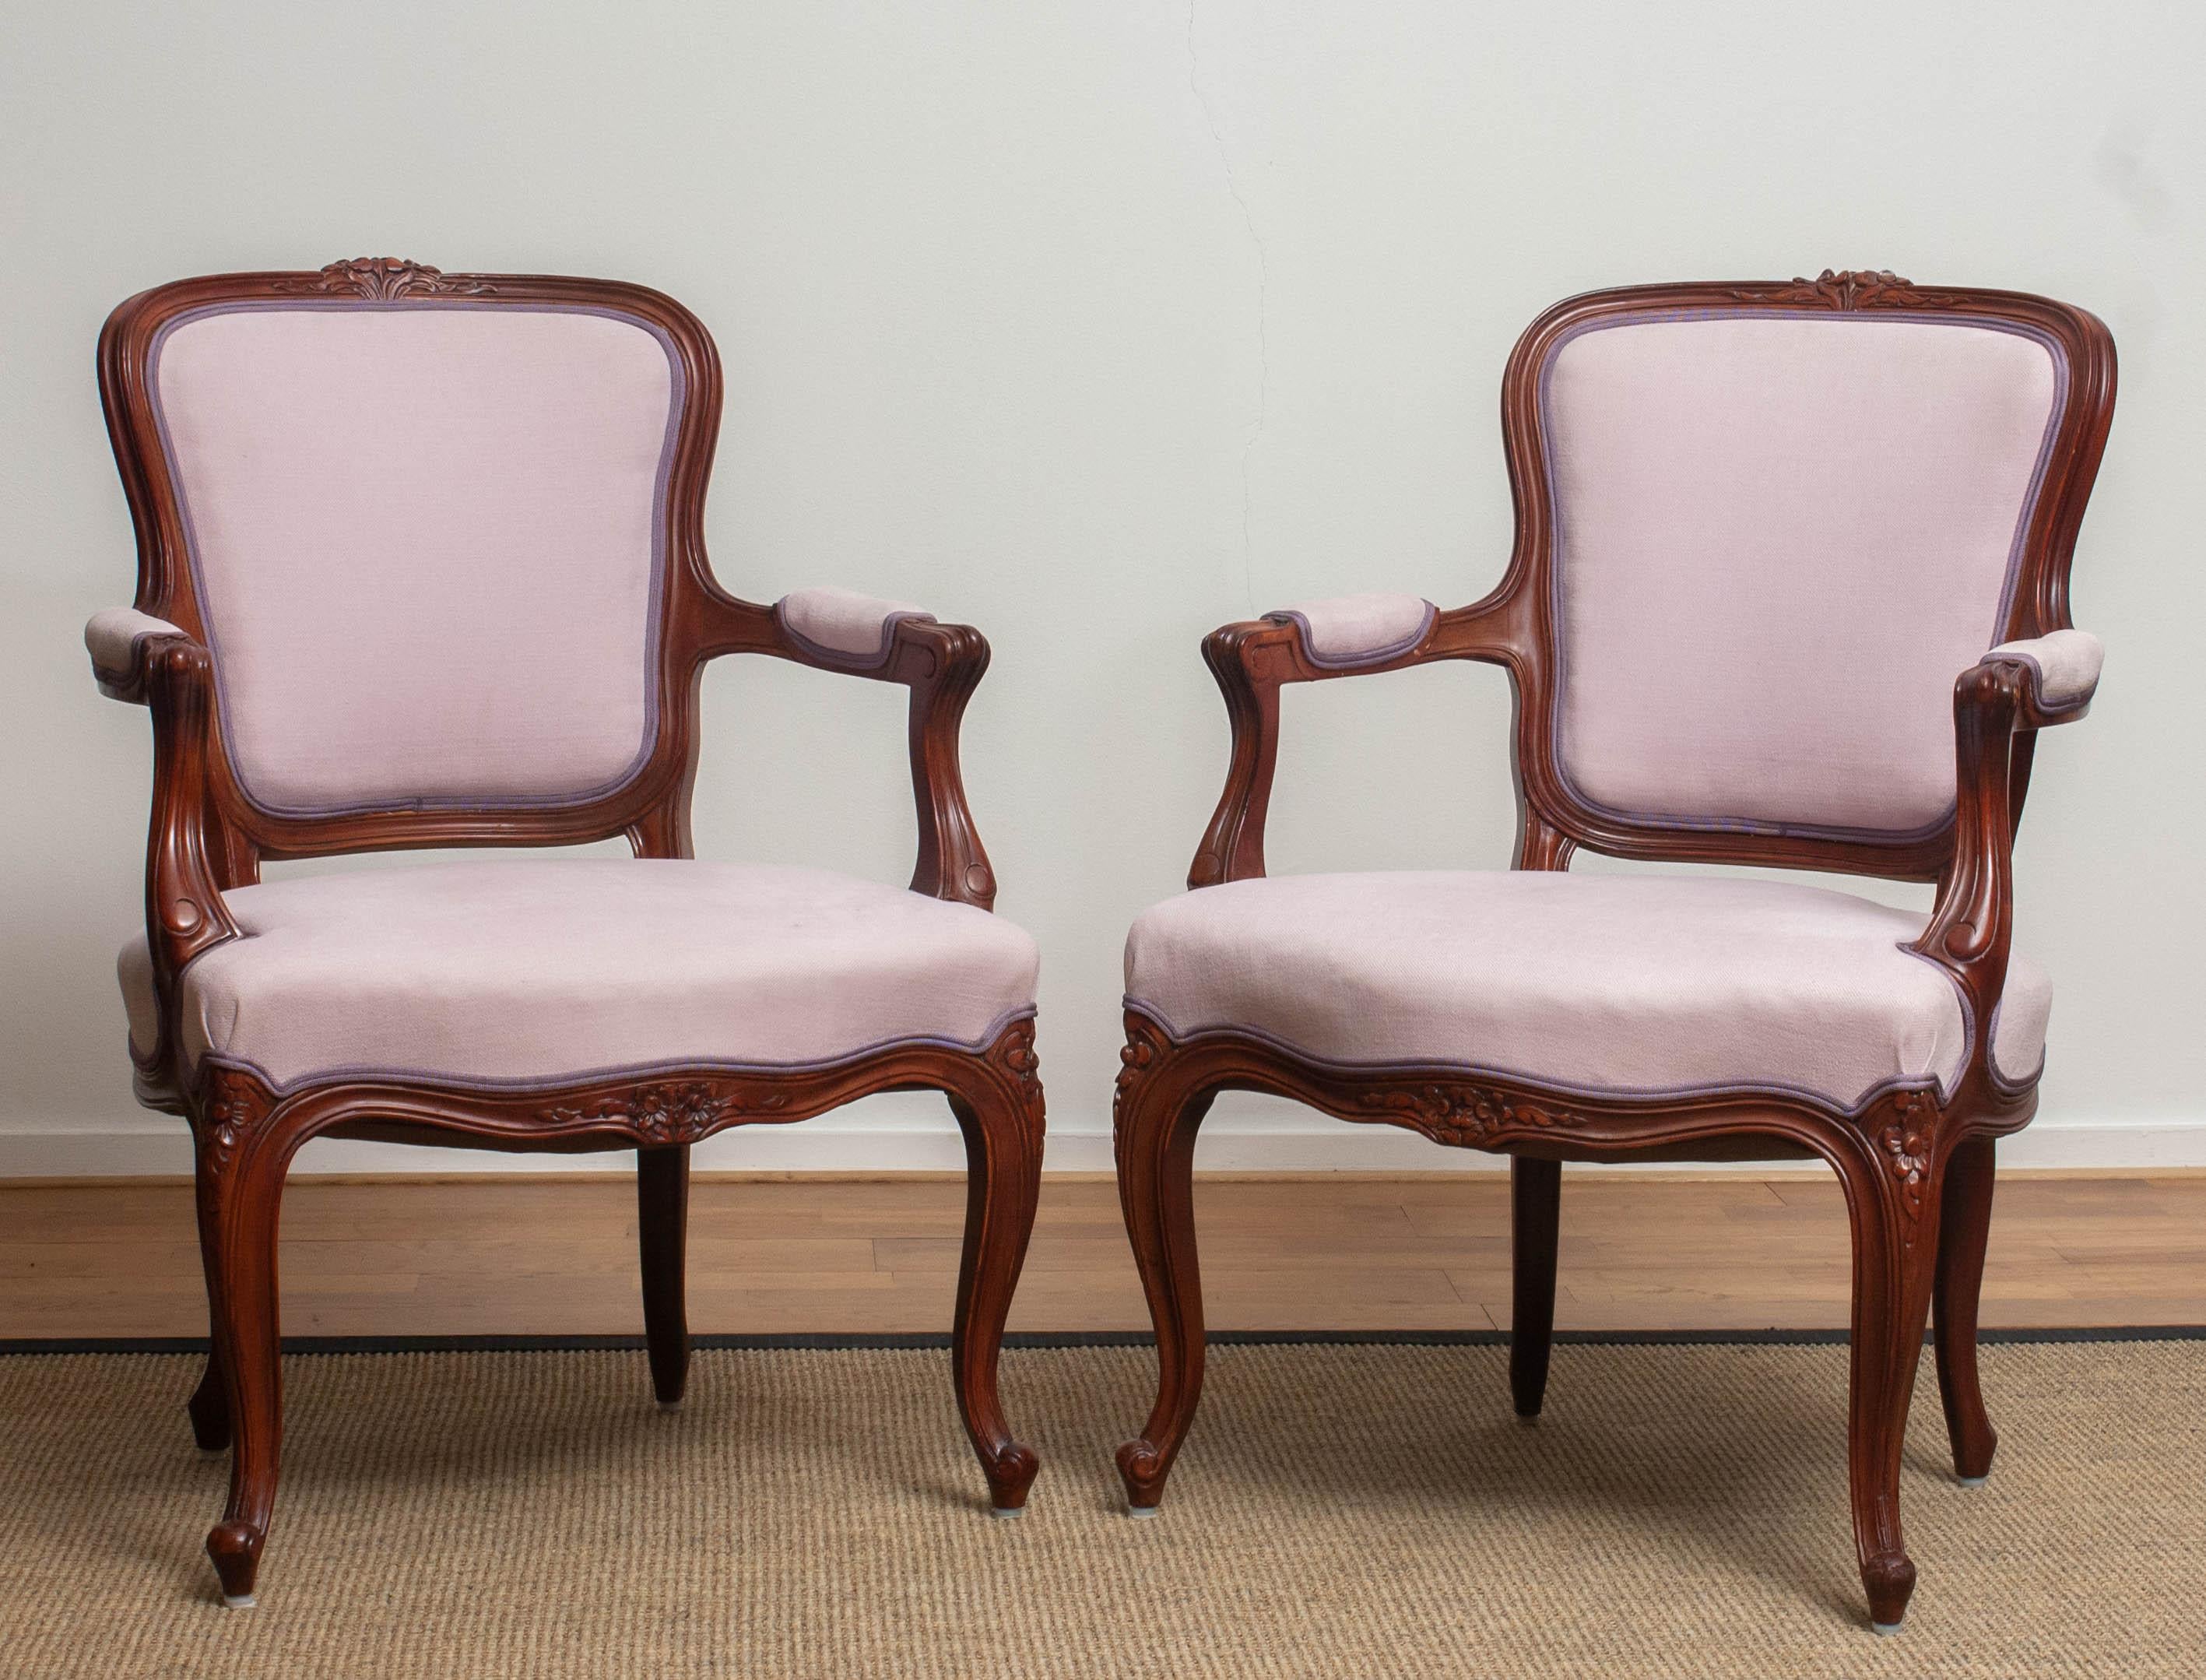 Fabric 1950s Pair of Pink Swedish Rococo Bergère in the Shabby Chic Technique Chairs F